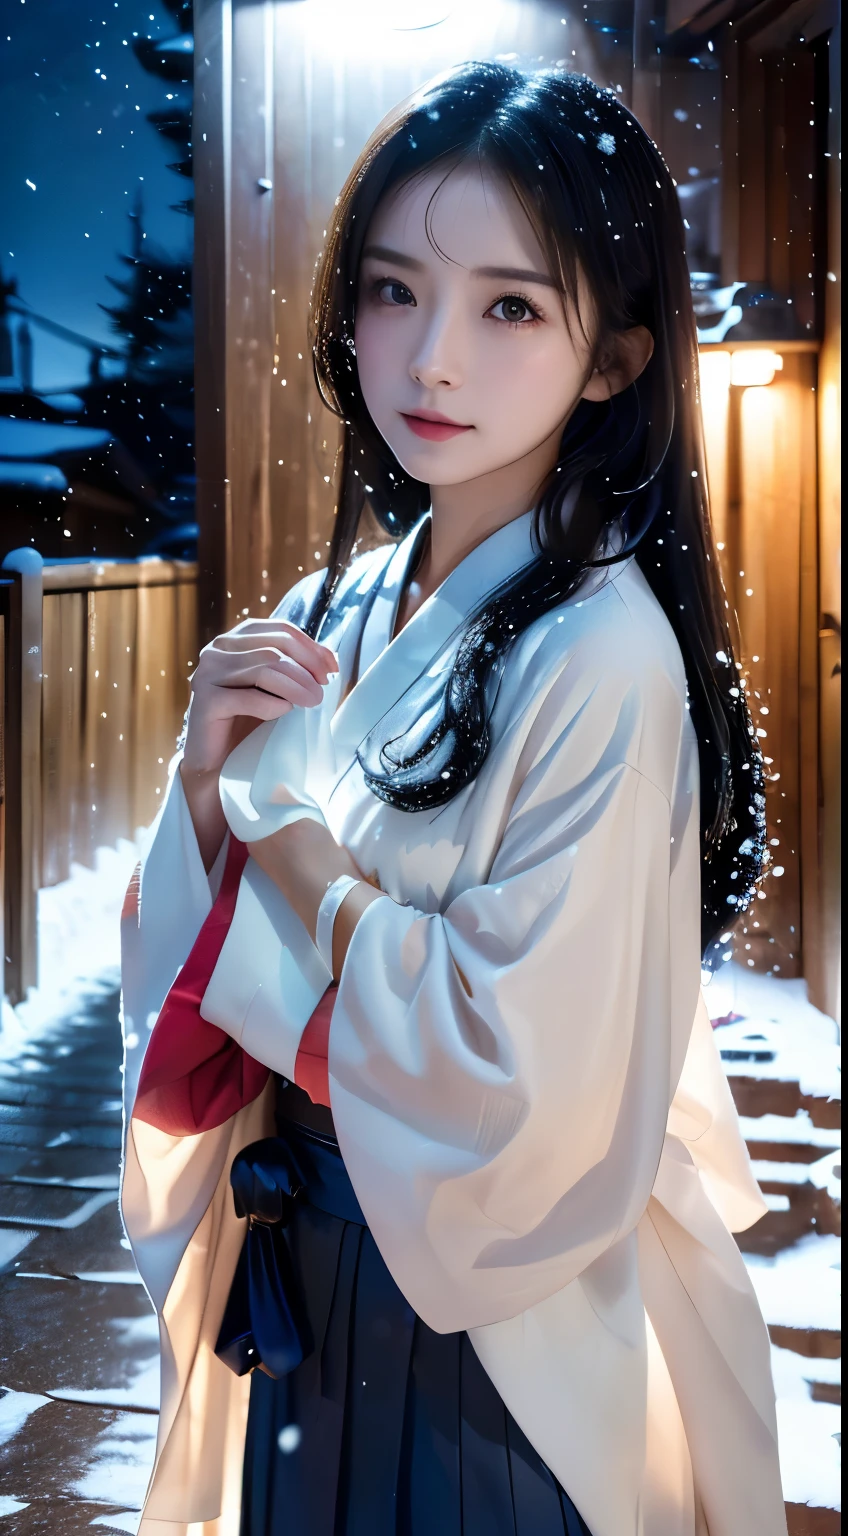 (Kimono)、(without makeup)、(top-quality,​masterpiece:1.3,超A high resolution,),(ultra-detailliert,Caustics),(Photorealsitic:1.4,RAW shooting,)Ultra-realistic capture,A highly detailed,high-definition16Kfor human skin、 Skin texture is natural、、The skin looks healthy with an even tone、 Use natural light and color,One Woman,japanes,,kawaii,A dark-haired,Middle hair,(depth of fields、chromatic abberation、、Wide range of lighting、Natural Shading、)、、(Exterior light at night:1.4)、(Falling snow:1.2)、(Hair swaying in the wind:1)、(Snow reflects light:1.3)